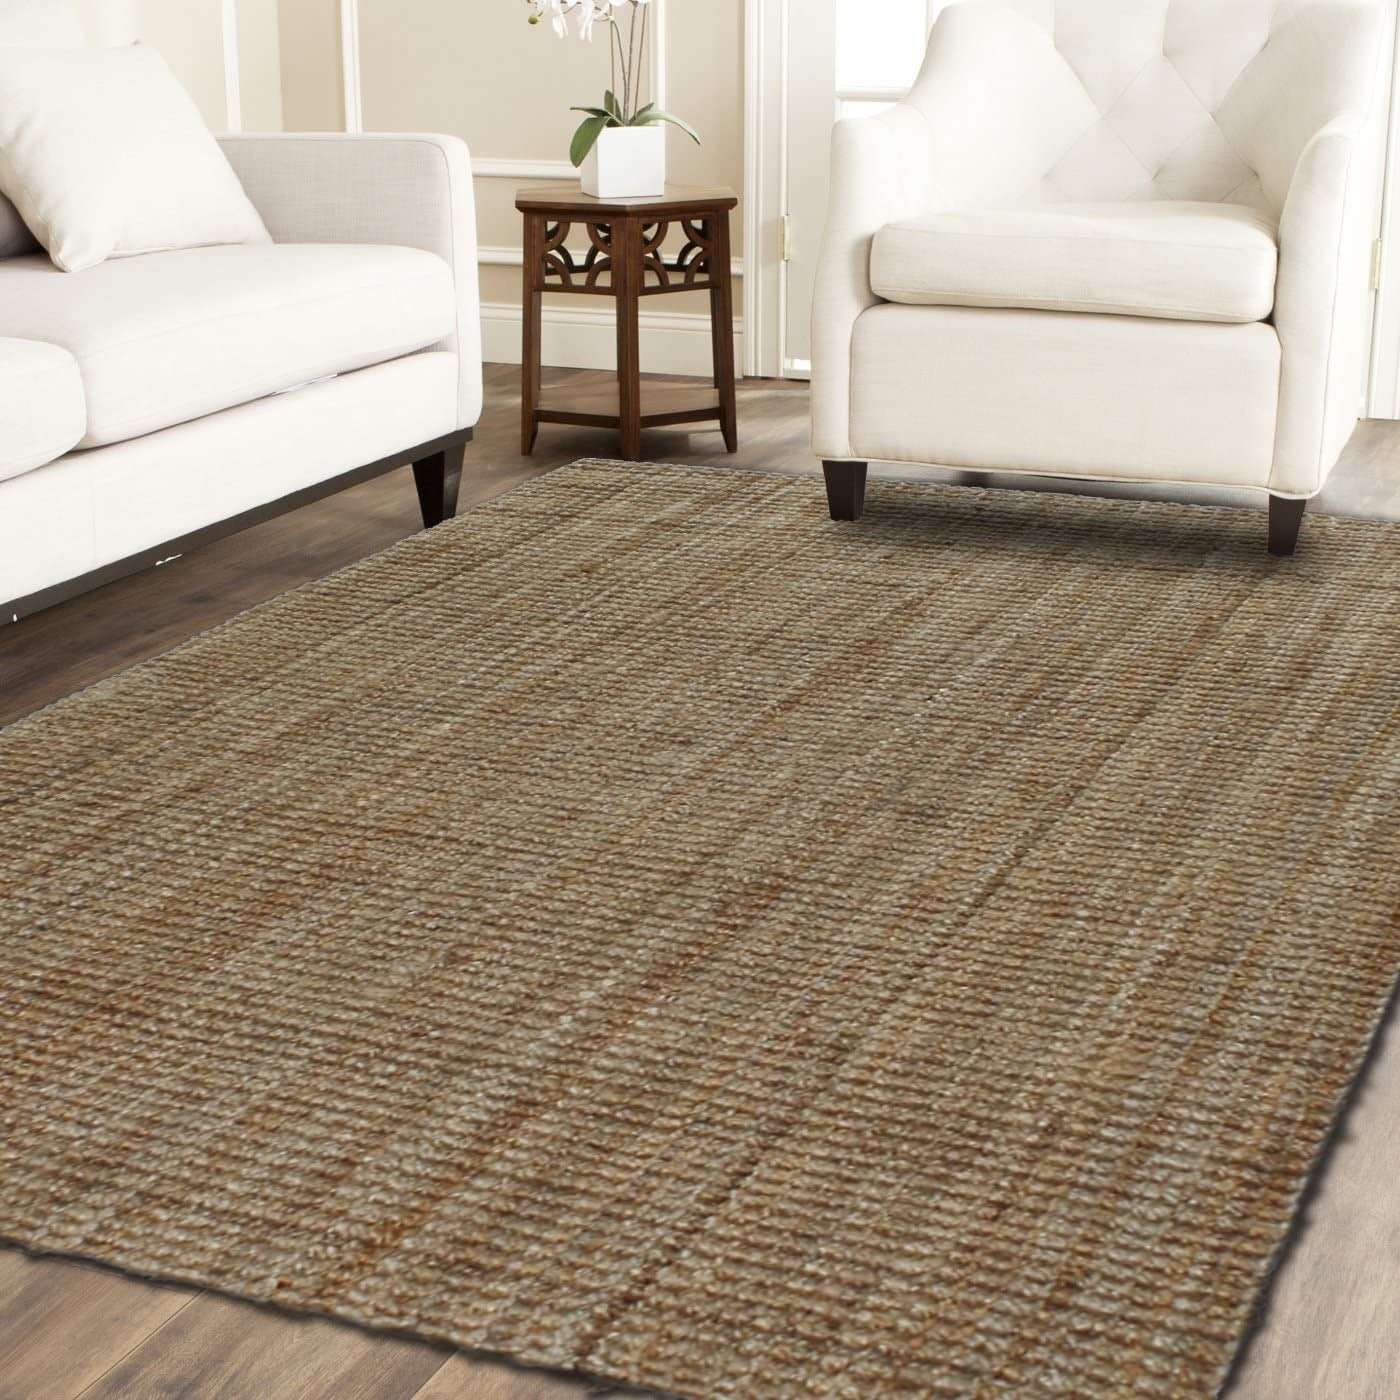 https://ak1.ostkcdn.com/images/products/is/images/direct/89472271e9f32ce0aa3f6c94ab6fdfa3dc19cb3e/A1HC-Handspun-Boucle-Natural-Jute-Rug%2C-Hand-Woven-Chunky-Jute-Indoor-Area-Rug-for-Entryway%2C-Dining-or-Living-Room.jpg